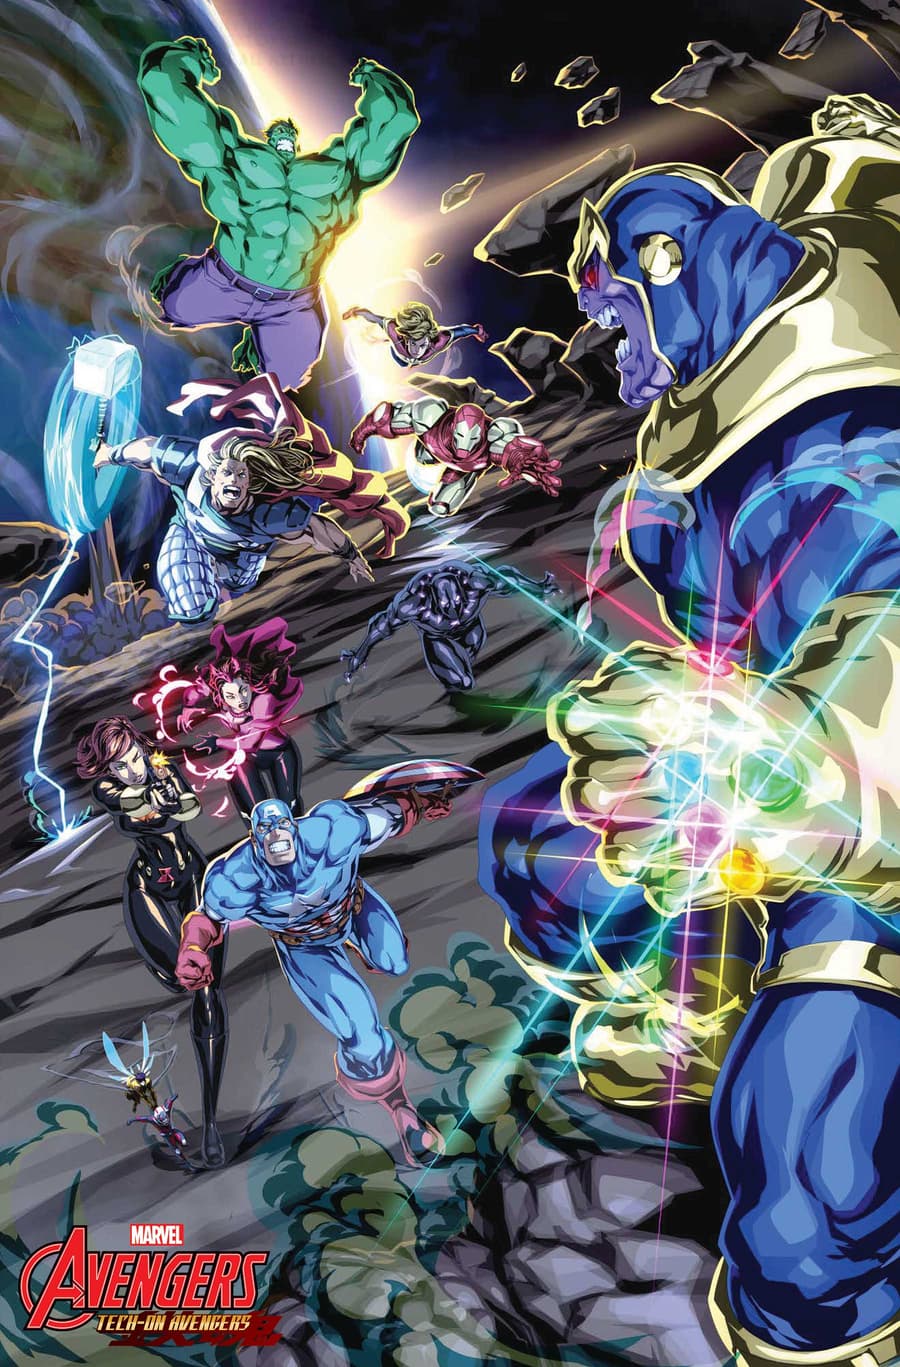 TECH-ON AVENGERS #1 preview art by Chamba